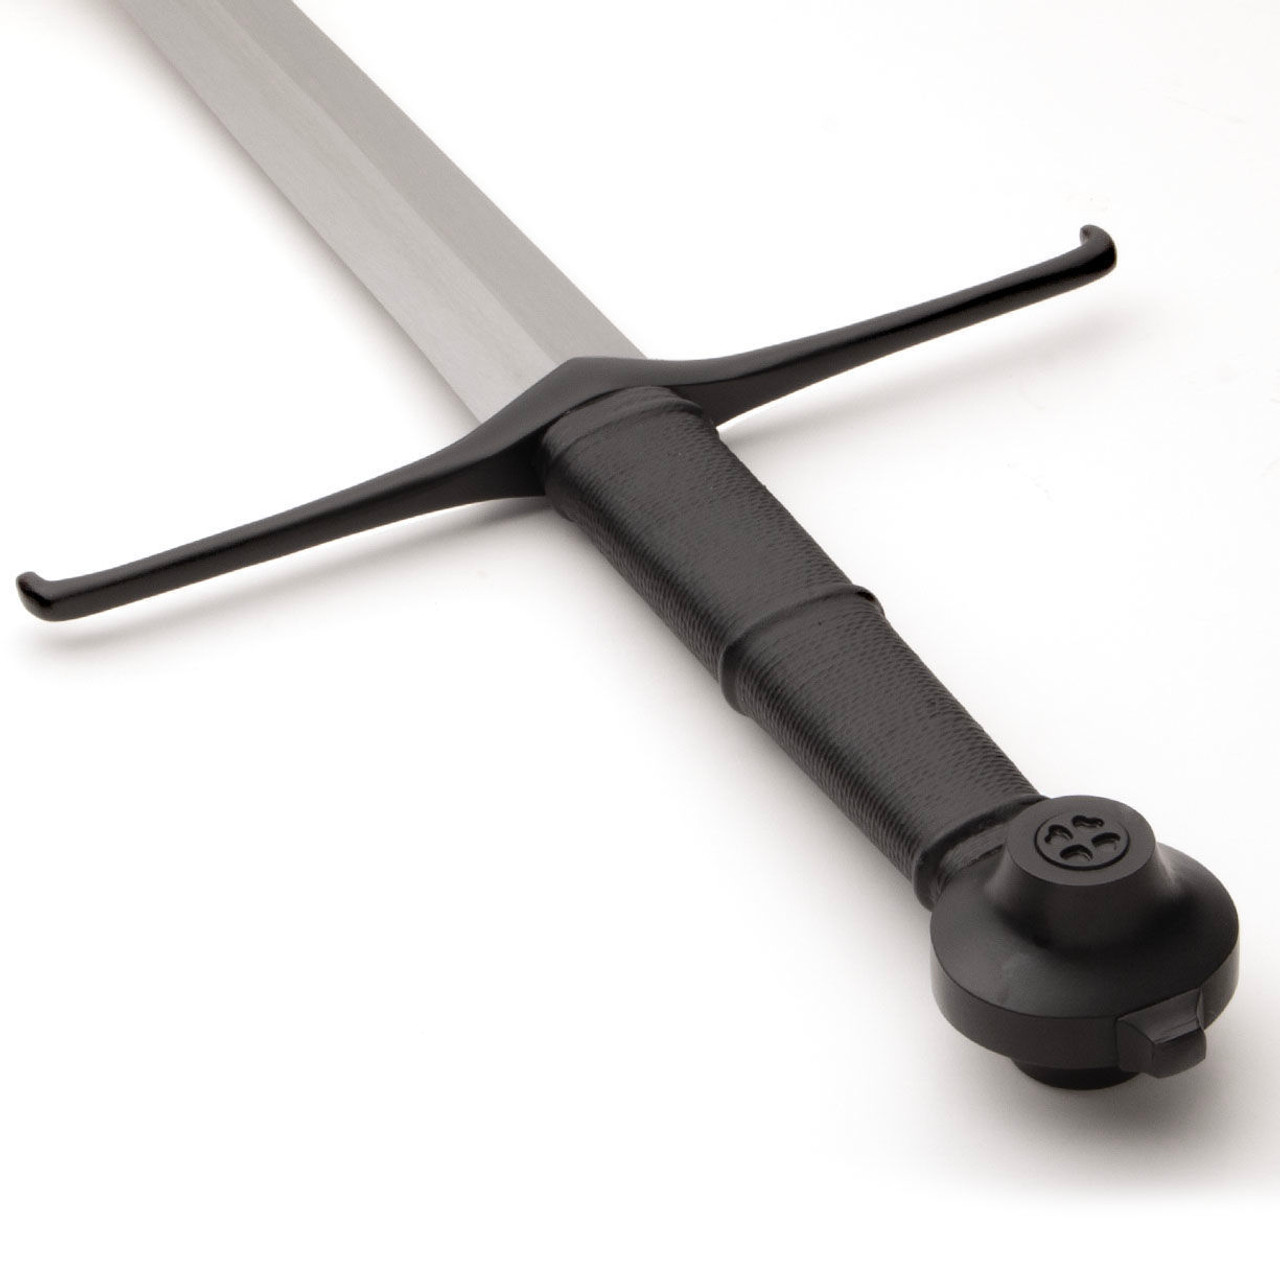 Windlass Black Prince Medieval Sword has sharp high carbon steel blade, includes leather scabbard with metal throat and chape